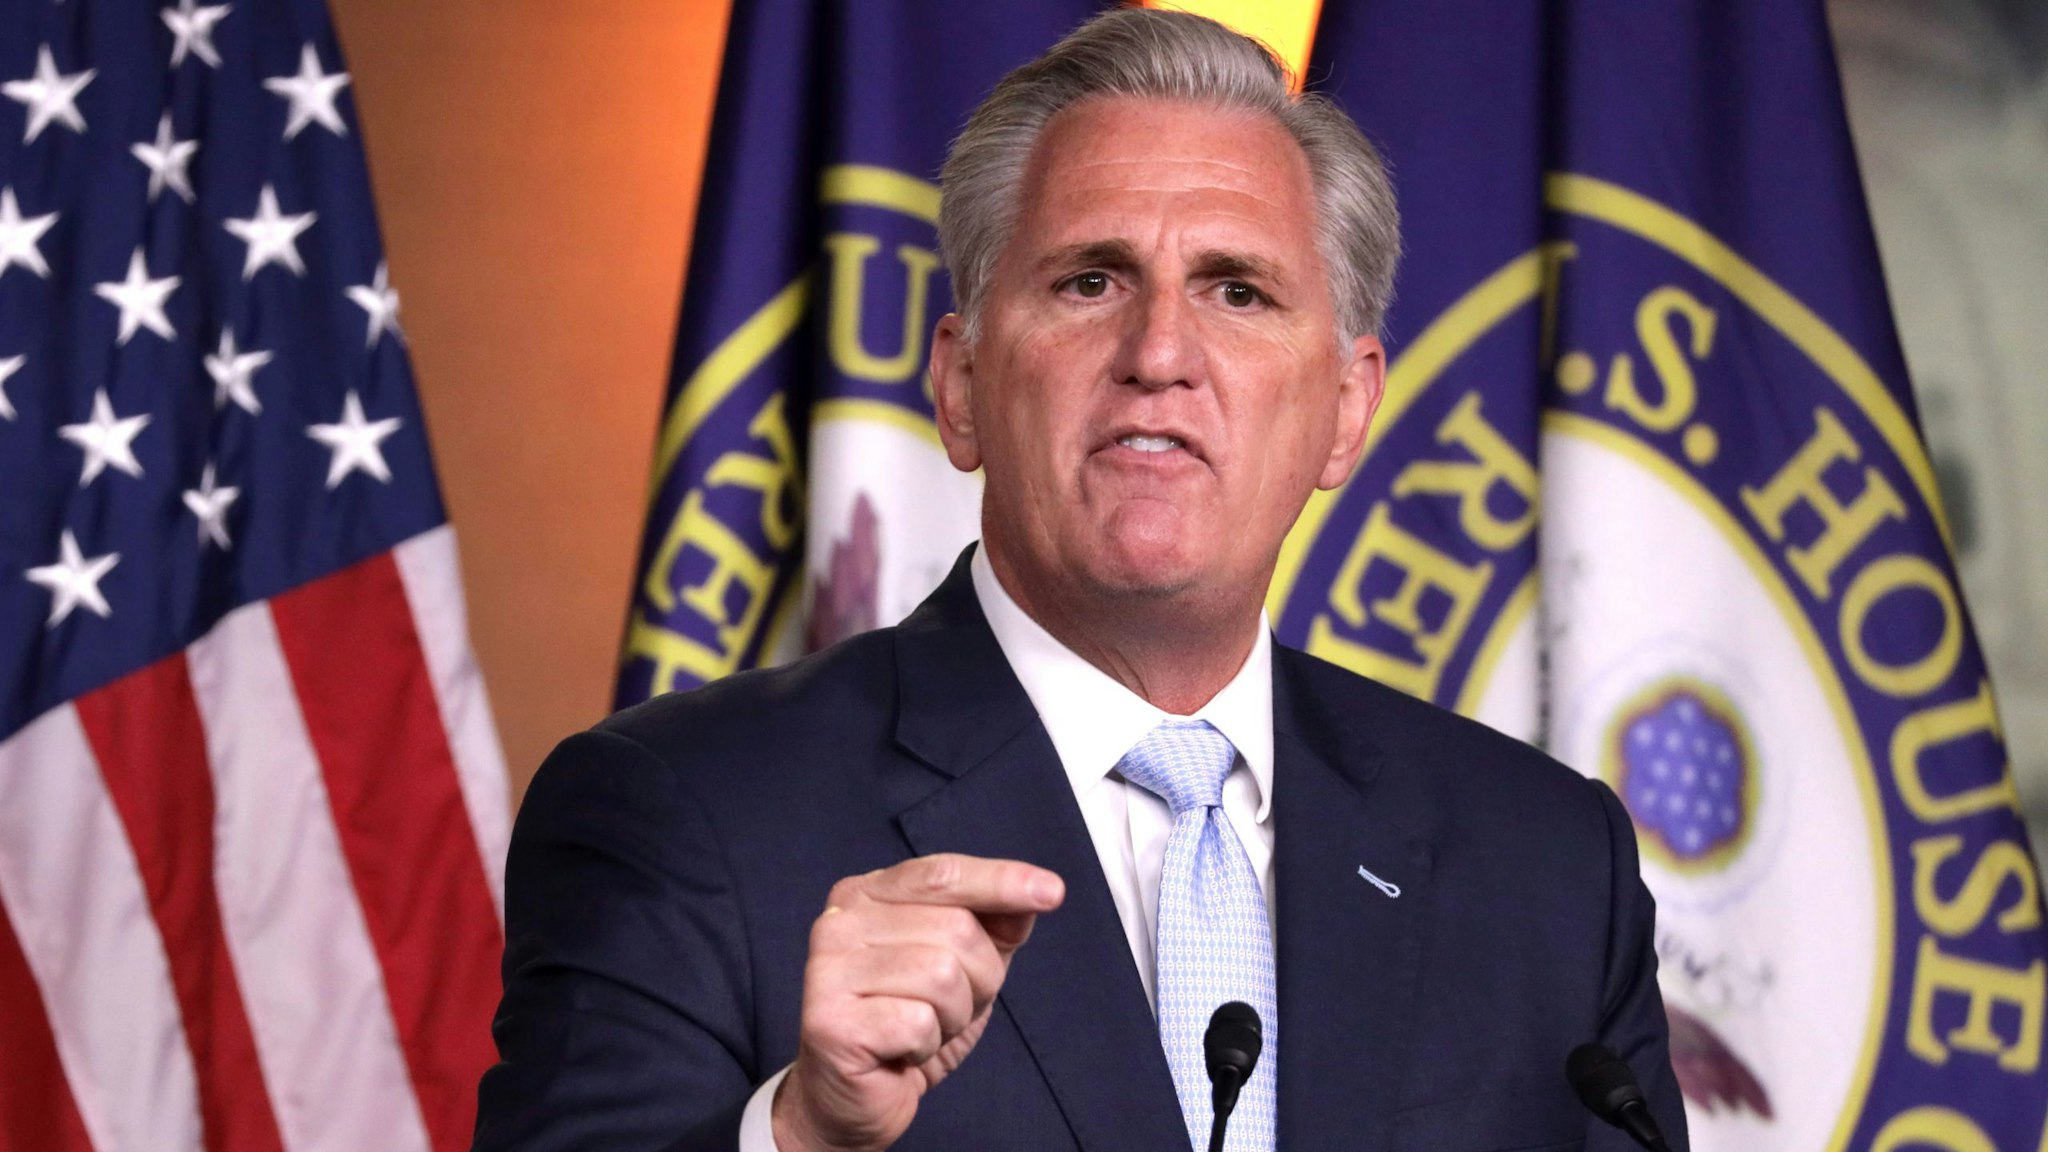 WASHINGTON, DC - JUNE 25: U.S. House Minority Leader Rep. Kevin McCarthy (R-CA) speaks during his weekly news conference June 25, 2020 on Capitol Hill in Washington, DC. McCarthy discuss various topics including the police reform bill.